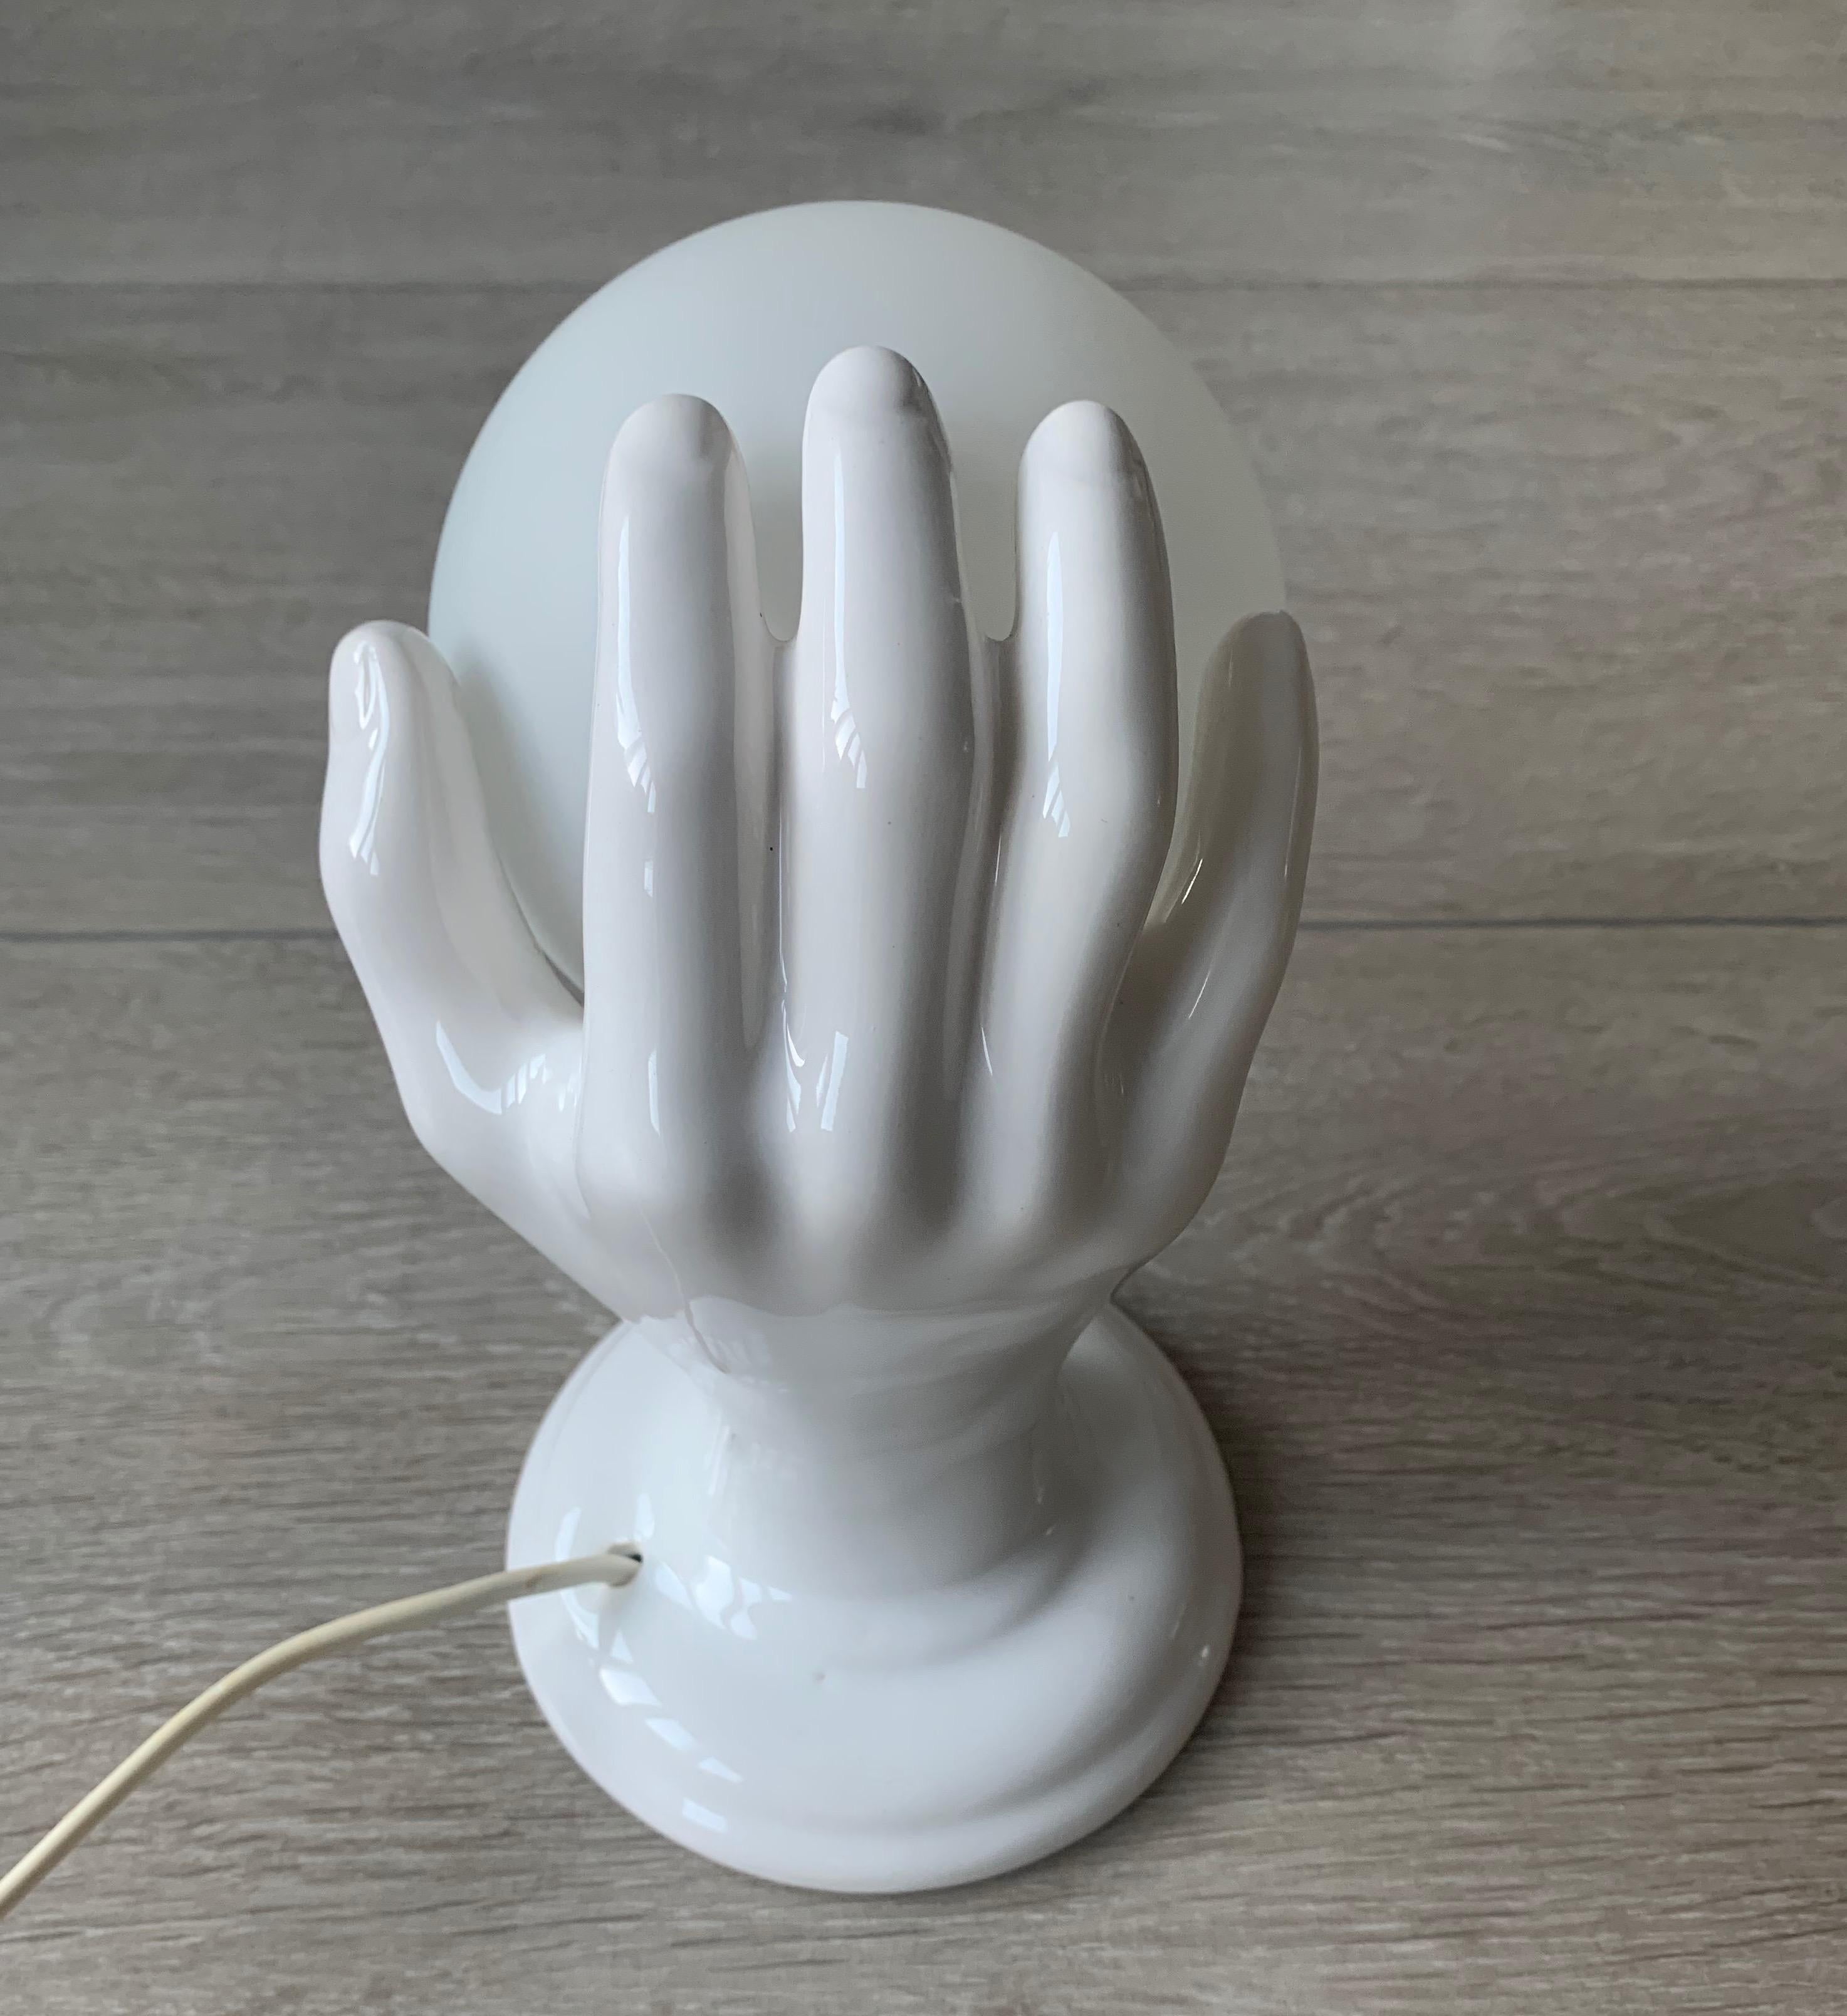 1970s Glazed White Ceramic Hand Holding a Glass Globe Wall Sconce or Wall Light 1